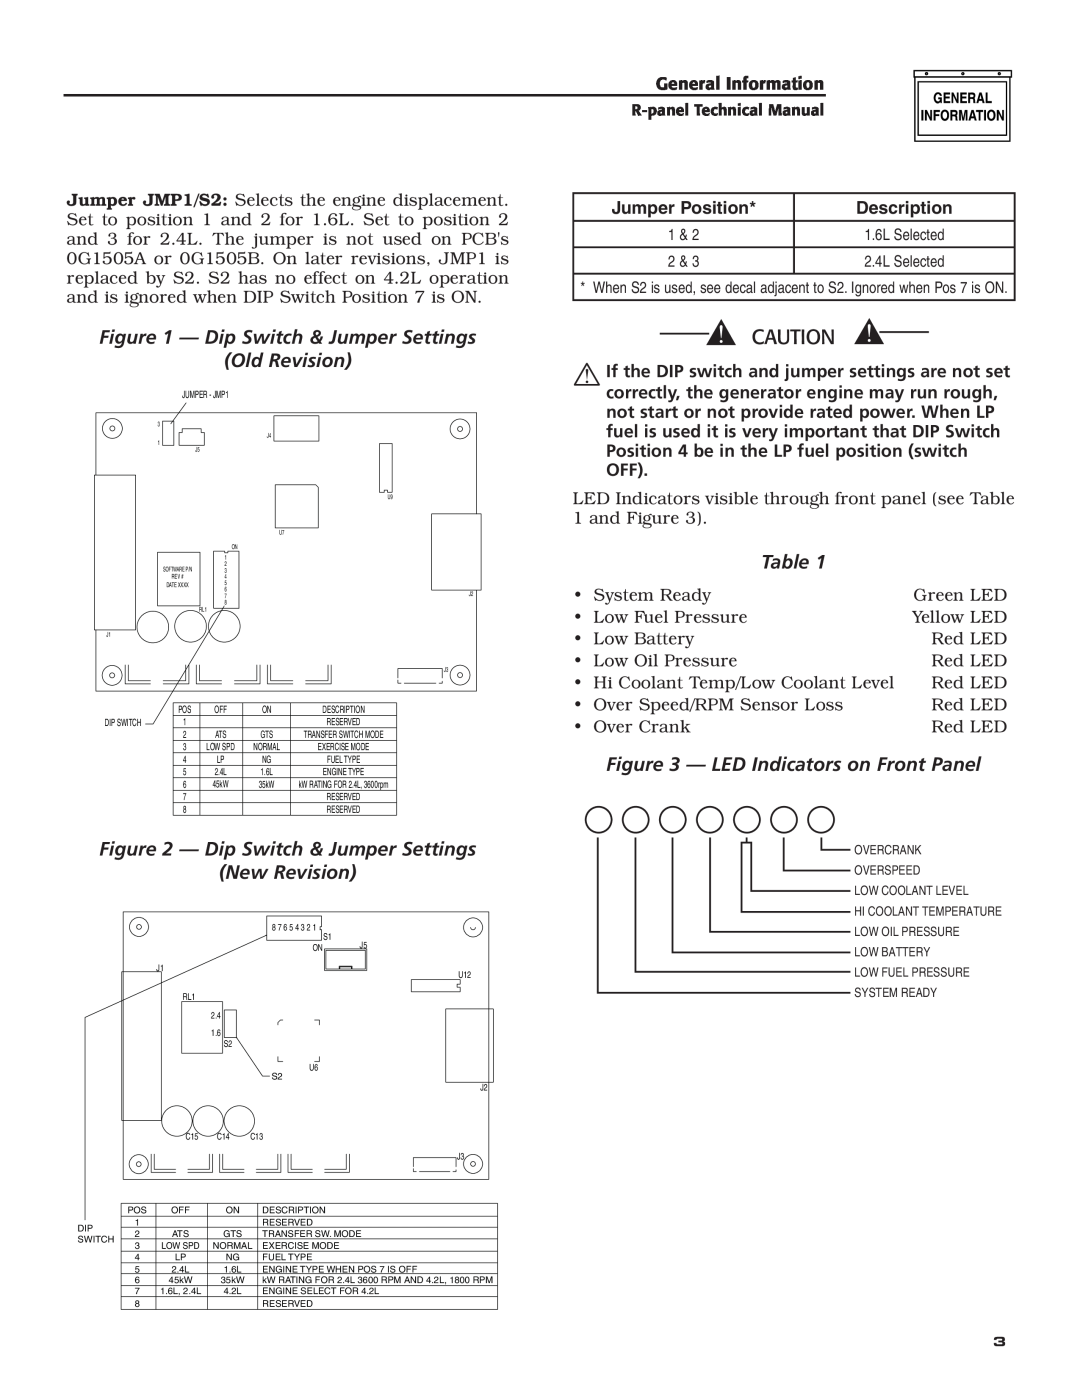 Generac Power Systems R-200A Dip Switch & Jumper Settings Old Revision, Dip Switch & Jumper Settings New Revision 